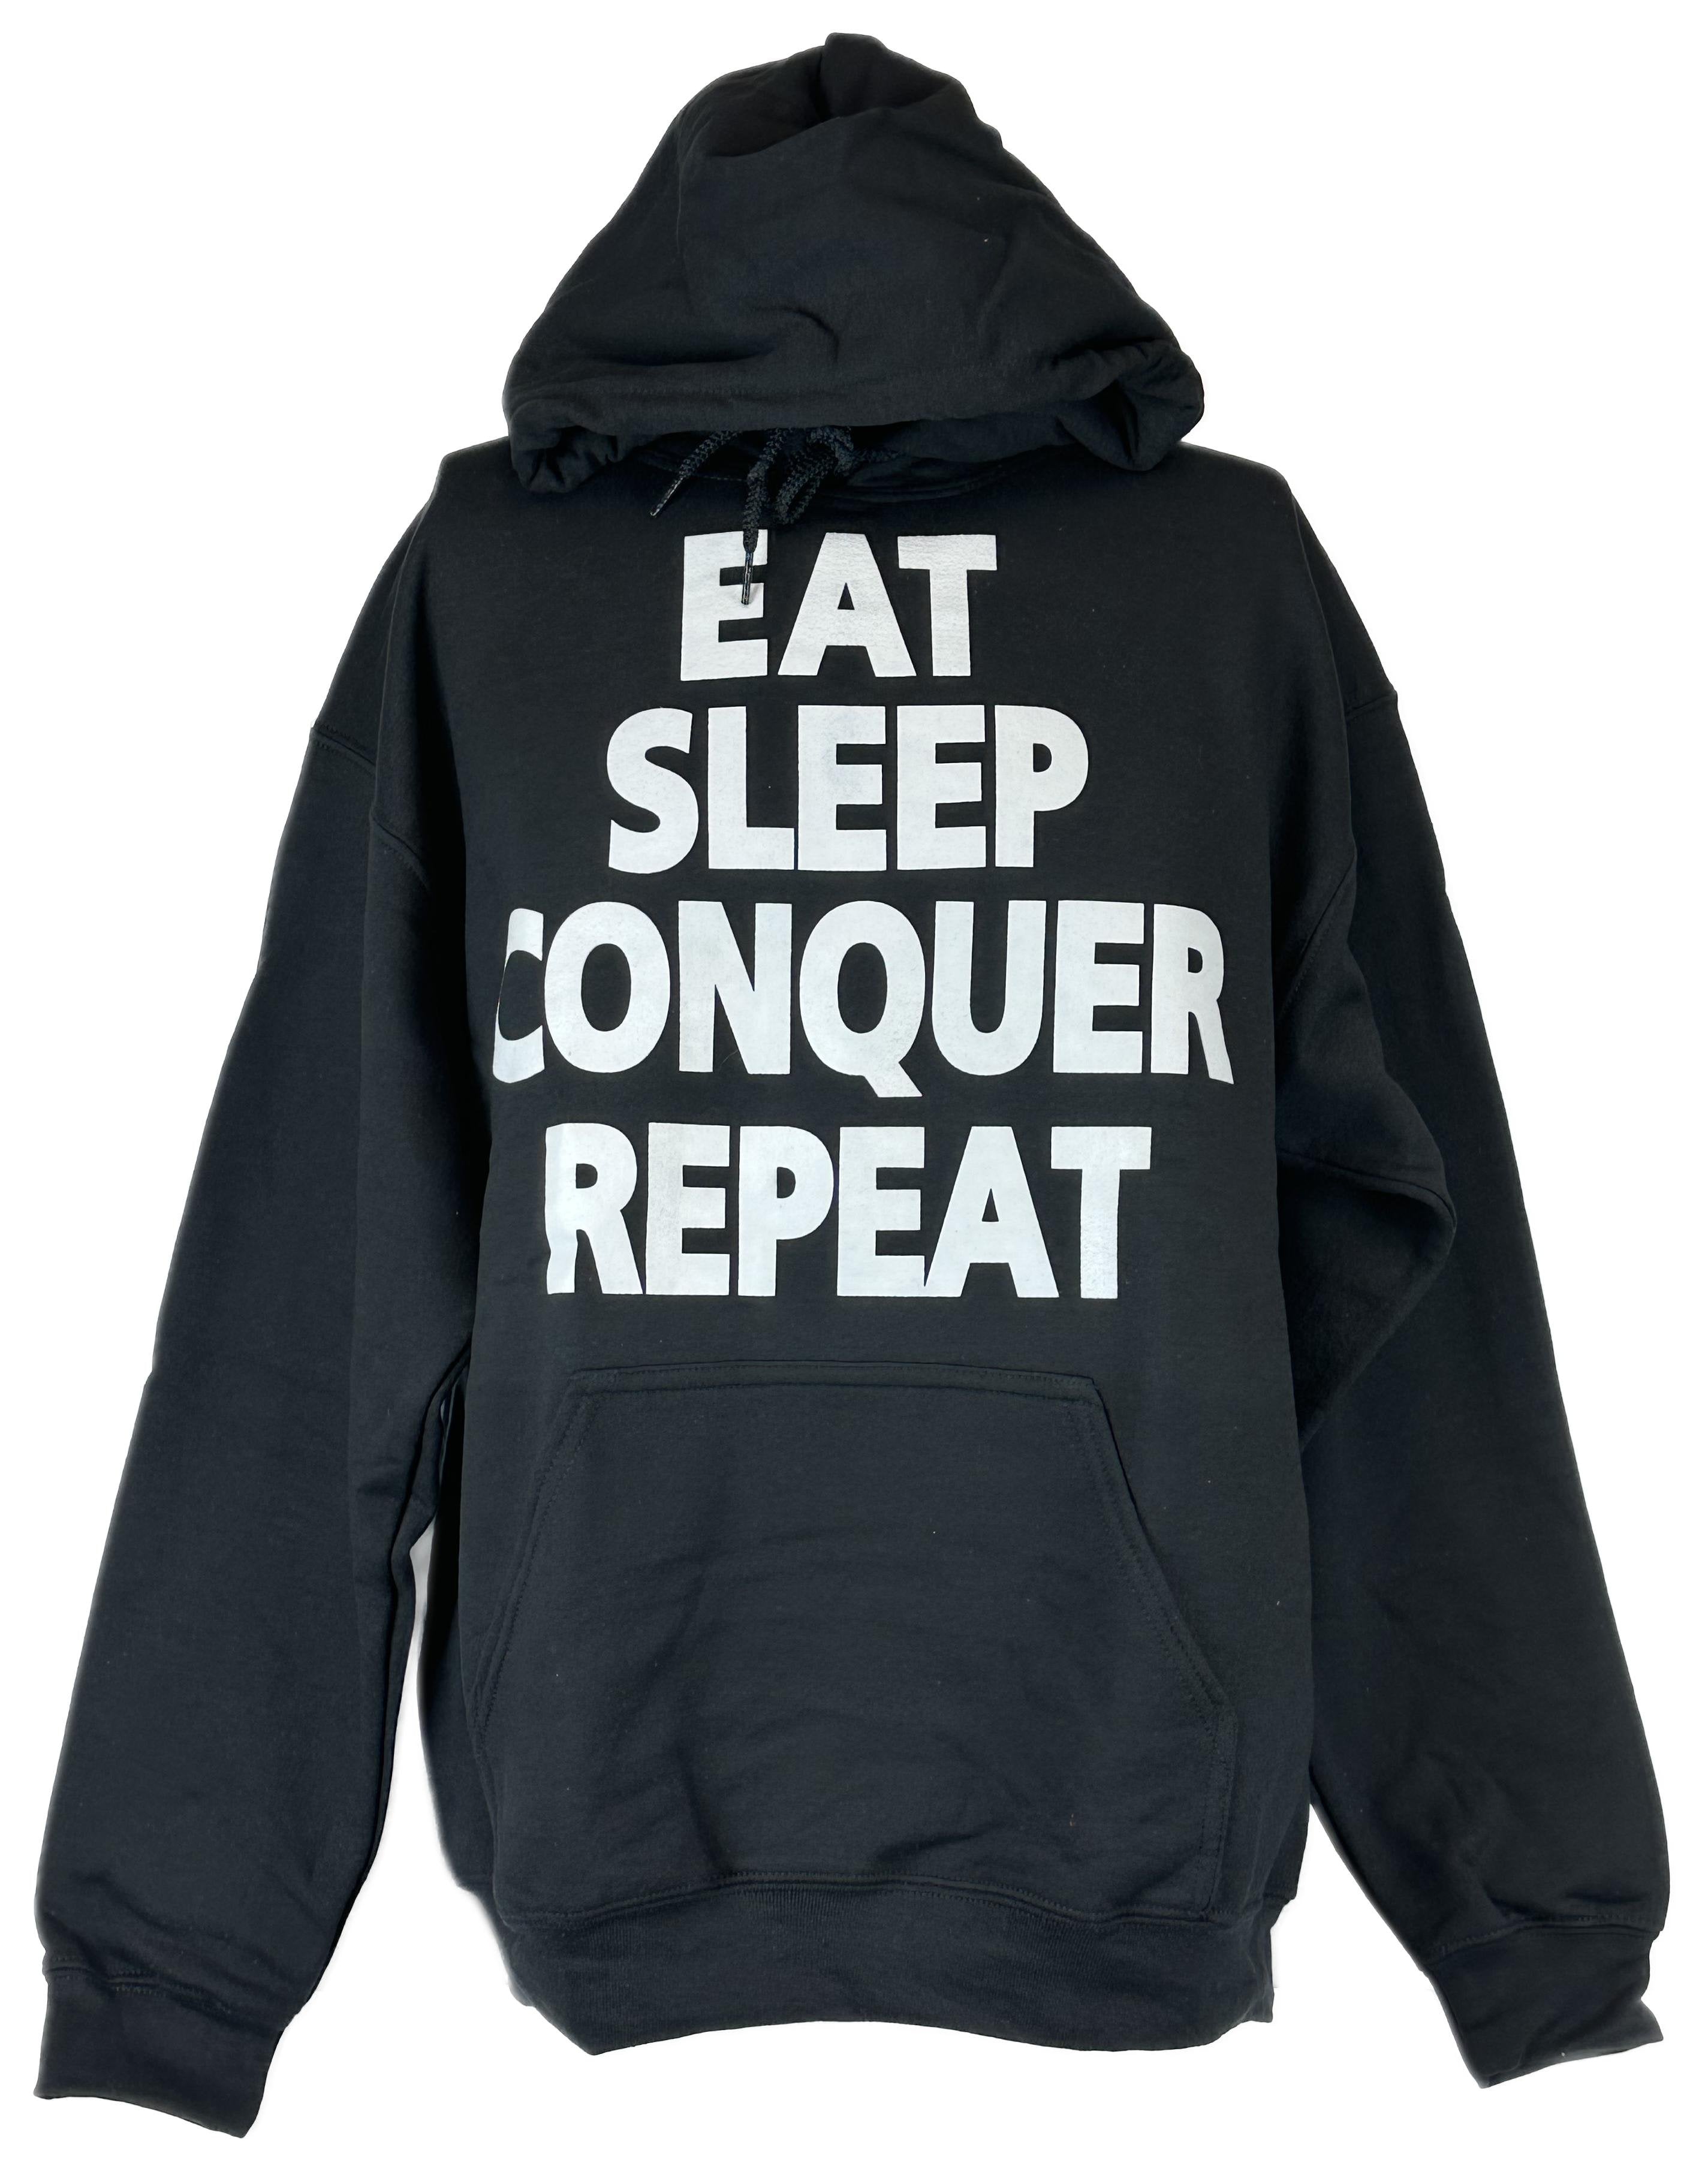 Brock Lesnar Eat Sleep Conquer Repeat Pullover Hoody Sweatshirt New –  Extreme Wrestling Shirts